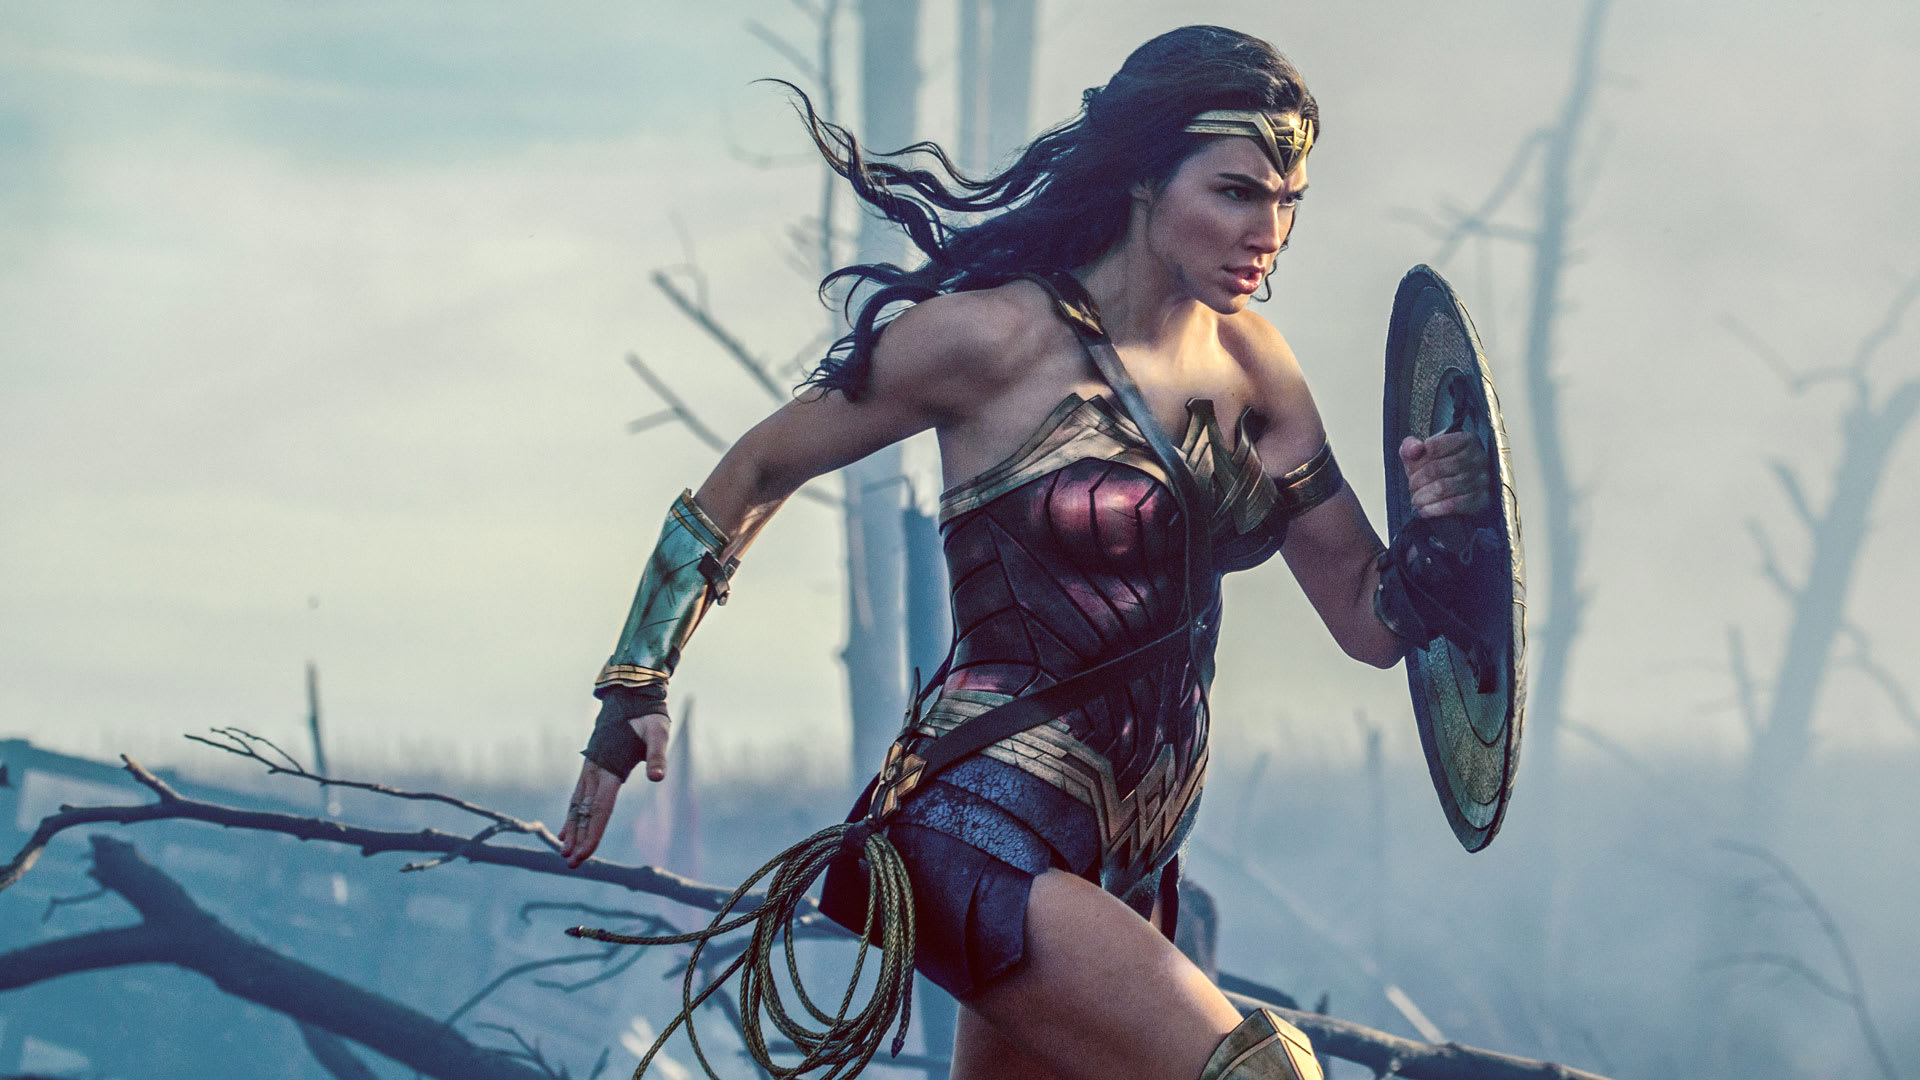 “Wonder Woman” director Patty Jenkins claps back at James Cameron’s controversial remarks